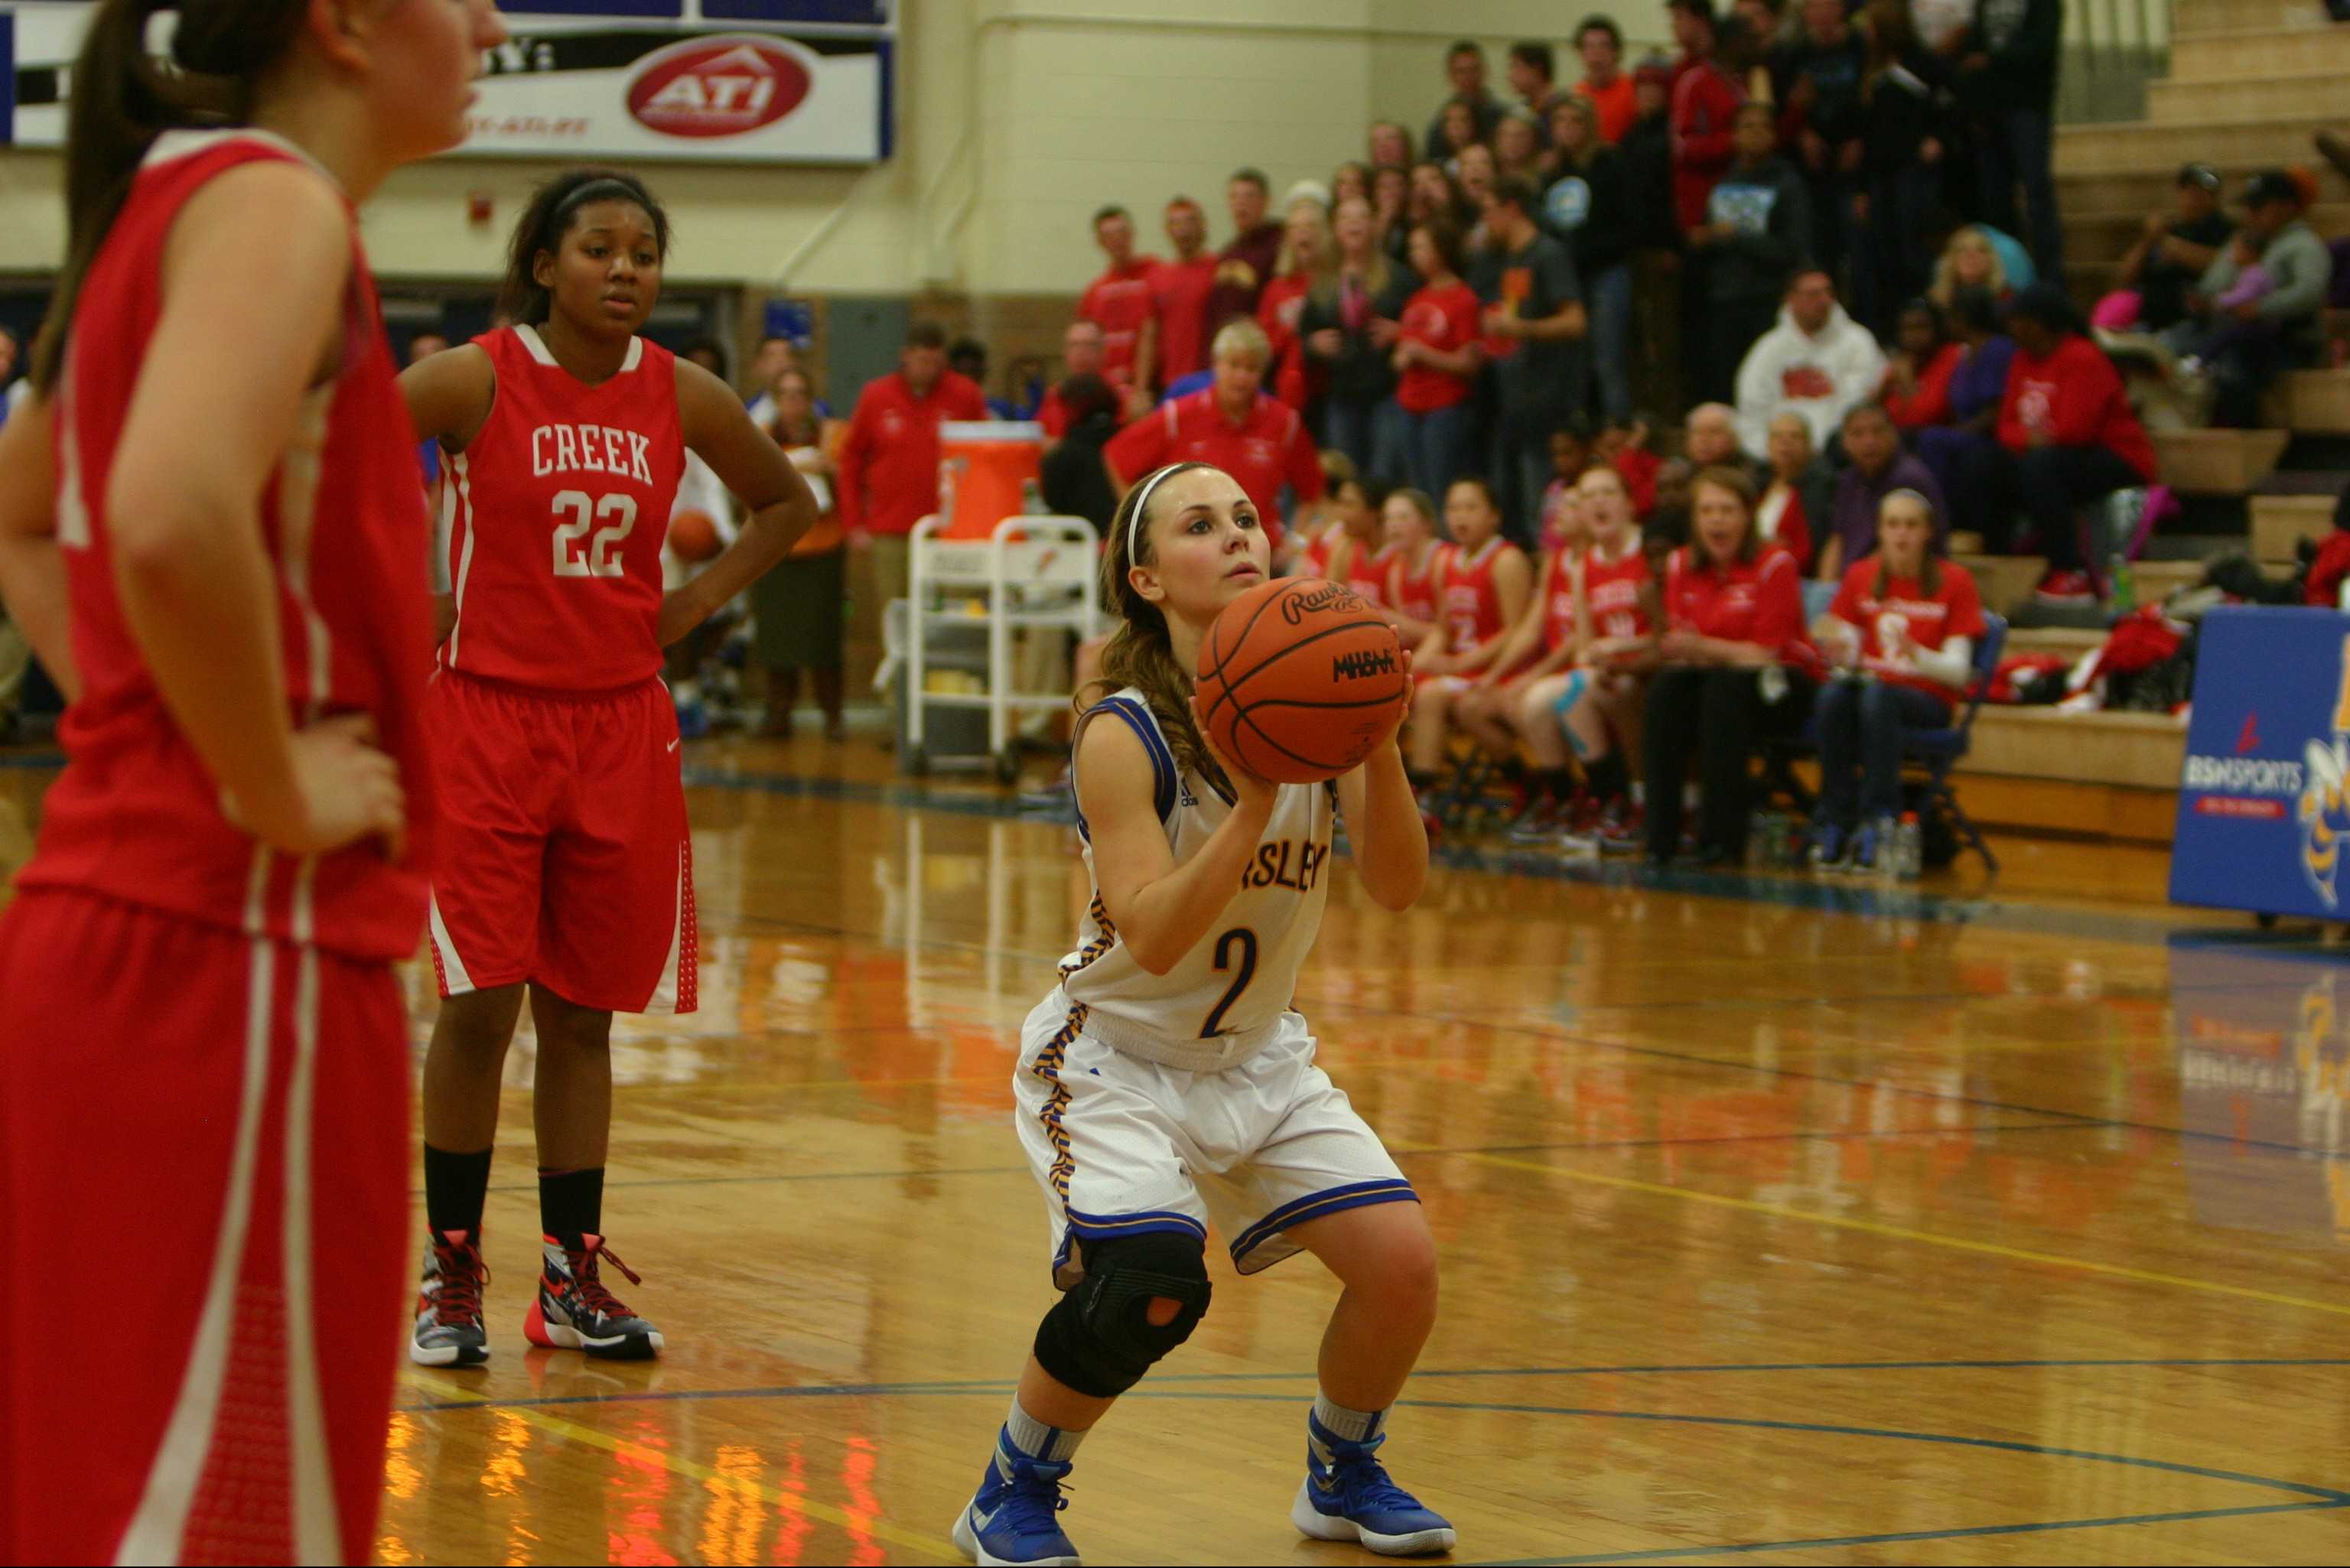 Junior Brittney Dick shoots a free throw against Swartz Creek on Friday, Dec. 11. Dick ended the game with seven points.